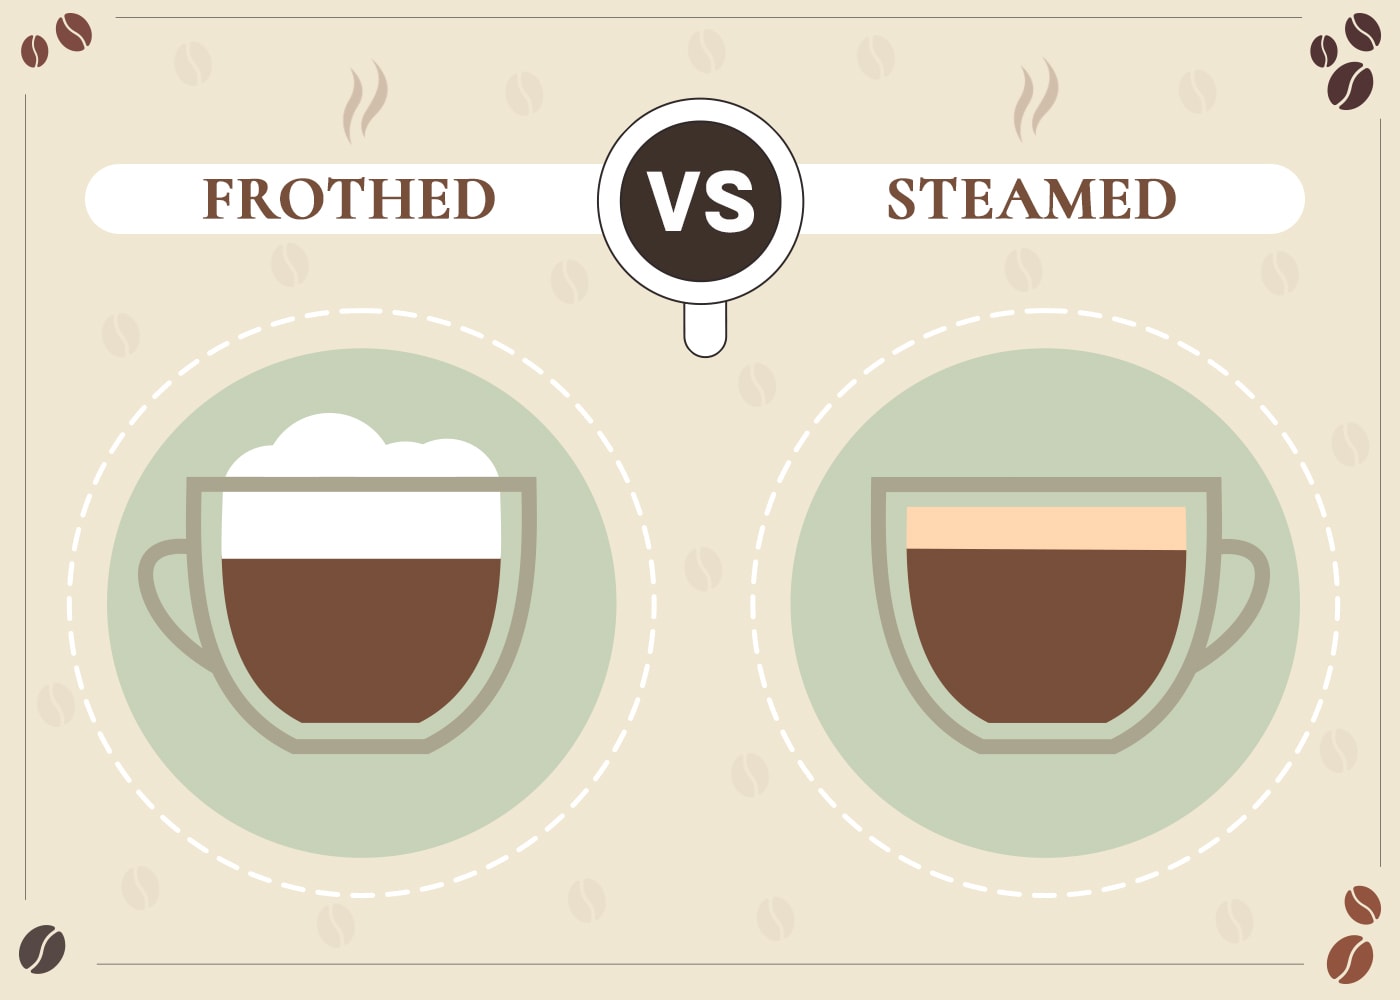 https://coffeeaffection.com/wp-content/uploads/2019/08/CoffeeAffection_Frothed-VS-Steamed_v1_Sep-1-2023.jpg